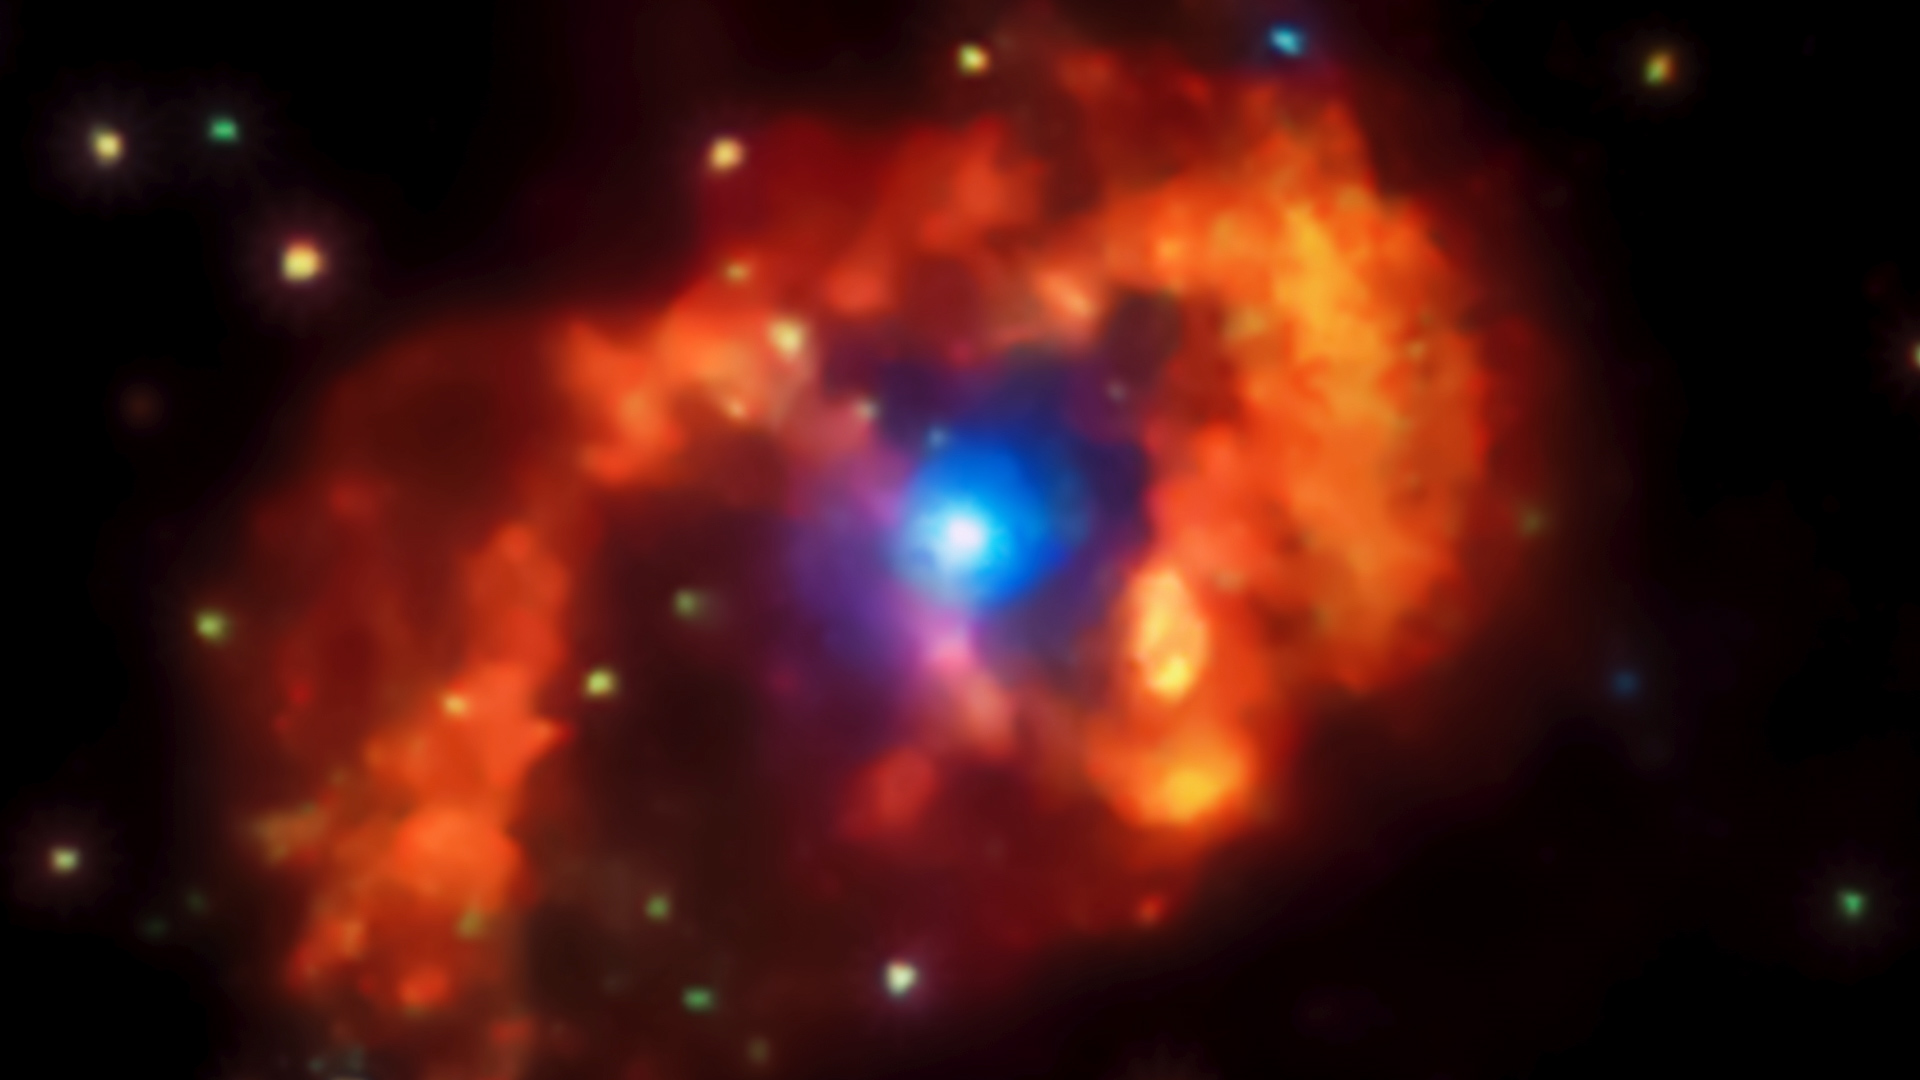 Zoom into Eta Carinae, where the outflows of two massive stars collide and shoot accelerated particles  cosmic rays  into space.Credit: NASA’s Goddard Space Flight Center  Music: "Expectant Aspect" from Killer Tracks.YouTube LinkComplete transcript available.